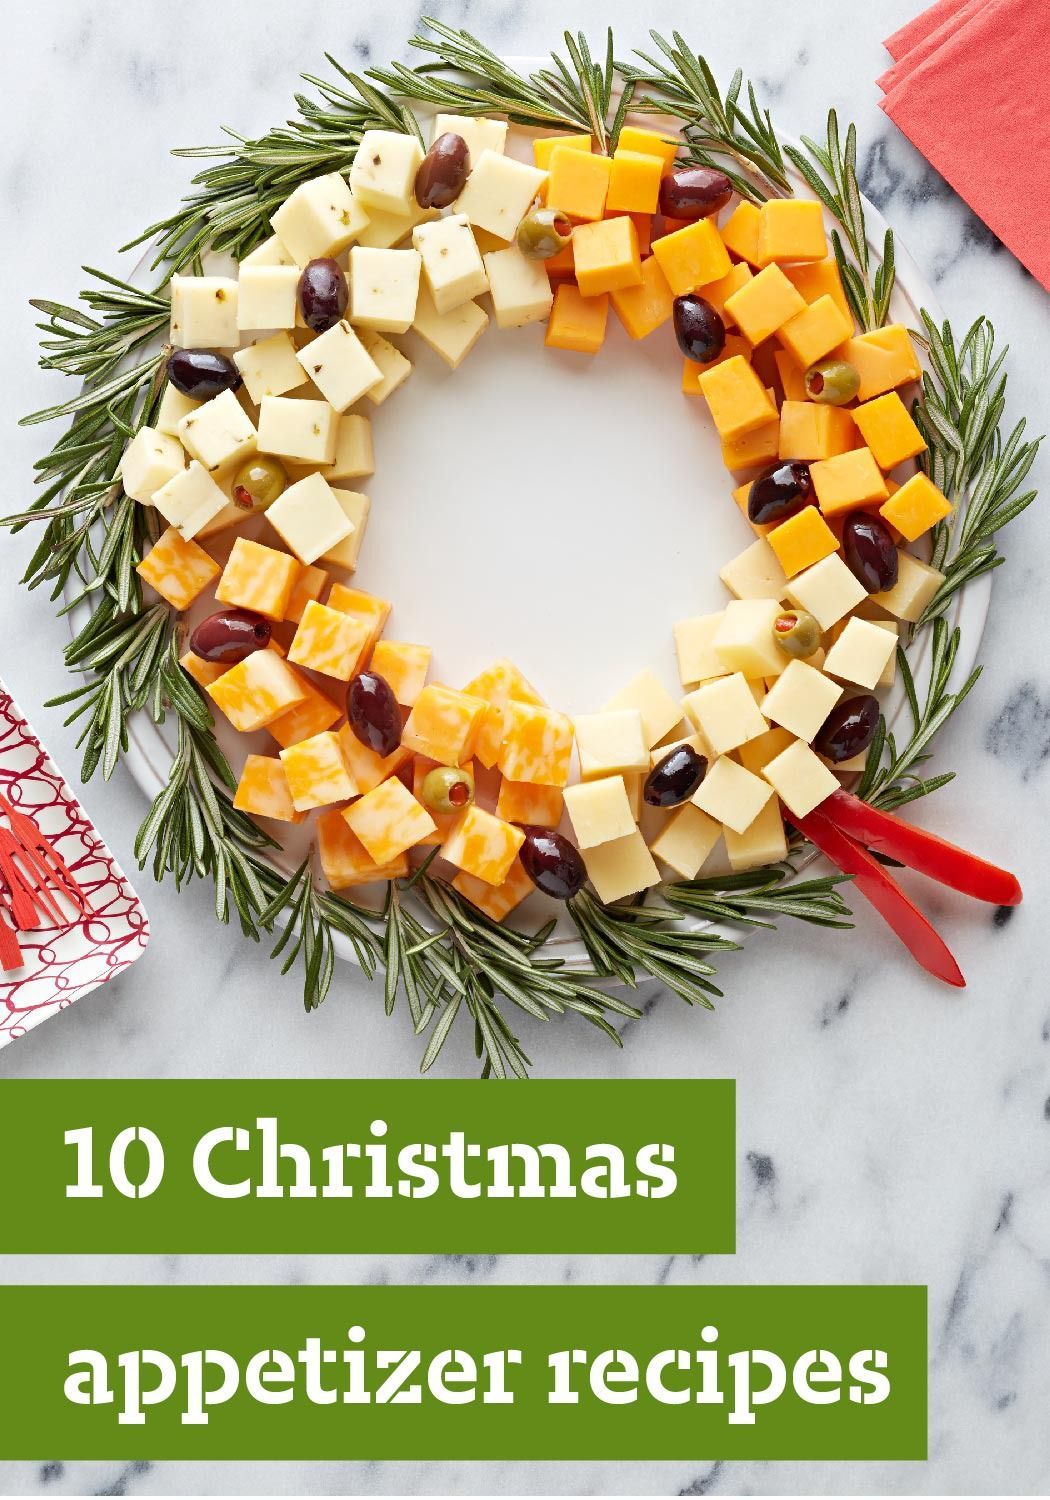 10 Christmas Appetizer Recipes — Planning your Christmas dinner menu? Start the